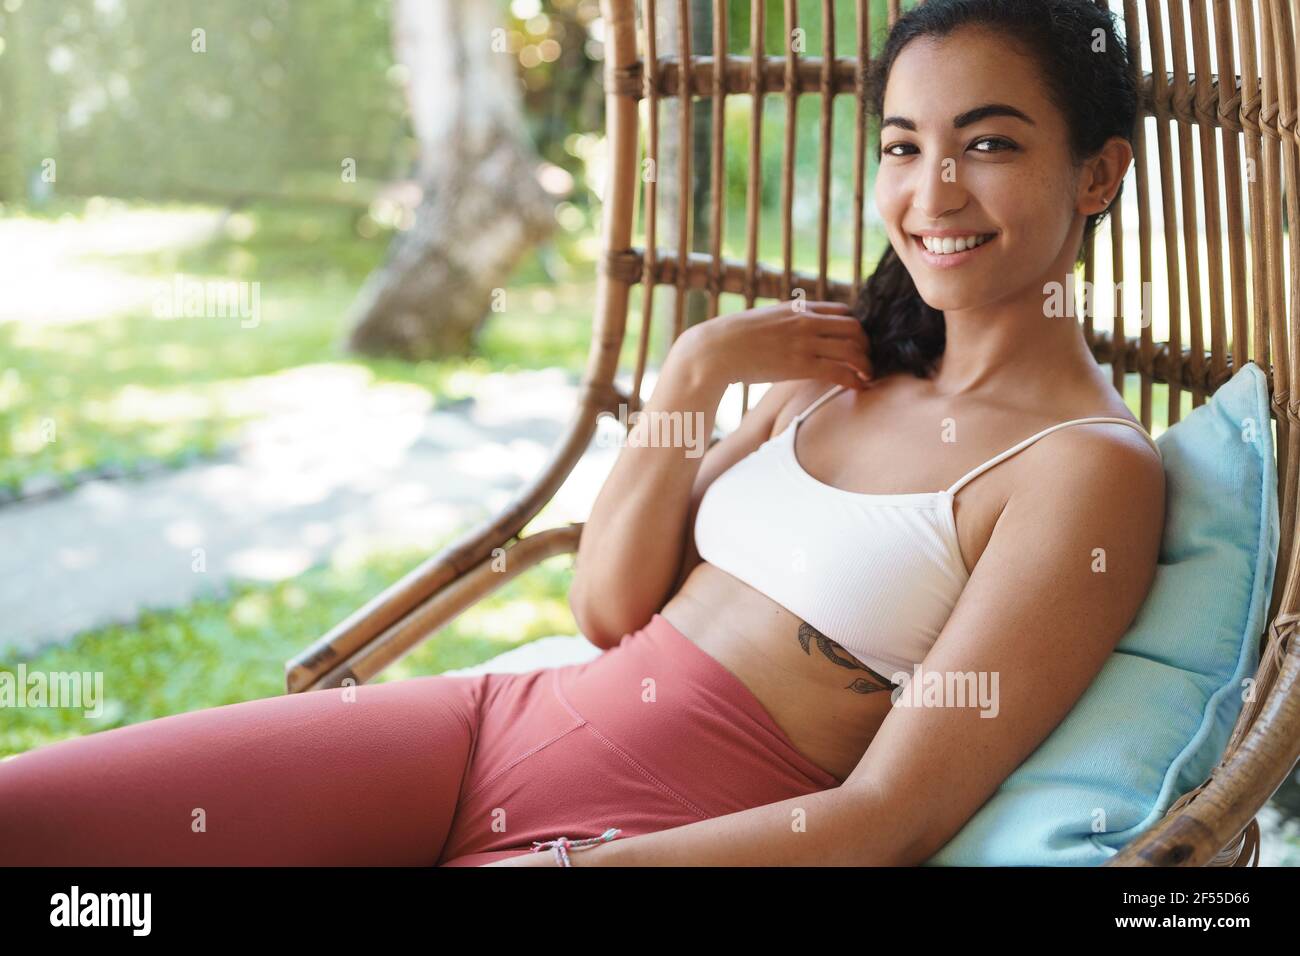 https://c8.alamy.com/comp/2F55D66/woman-feeling-energized-and-upbeat-after-morning-yoga-exercises-in-garden-attractive-smiling-female-in-sports-bra-leggings-lying-rattan-armchair-2F55D66.jpg